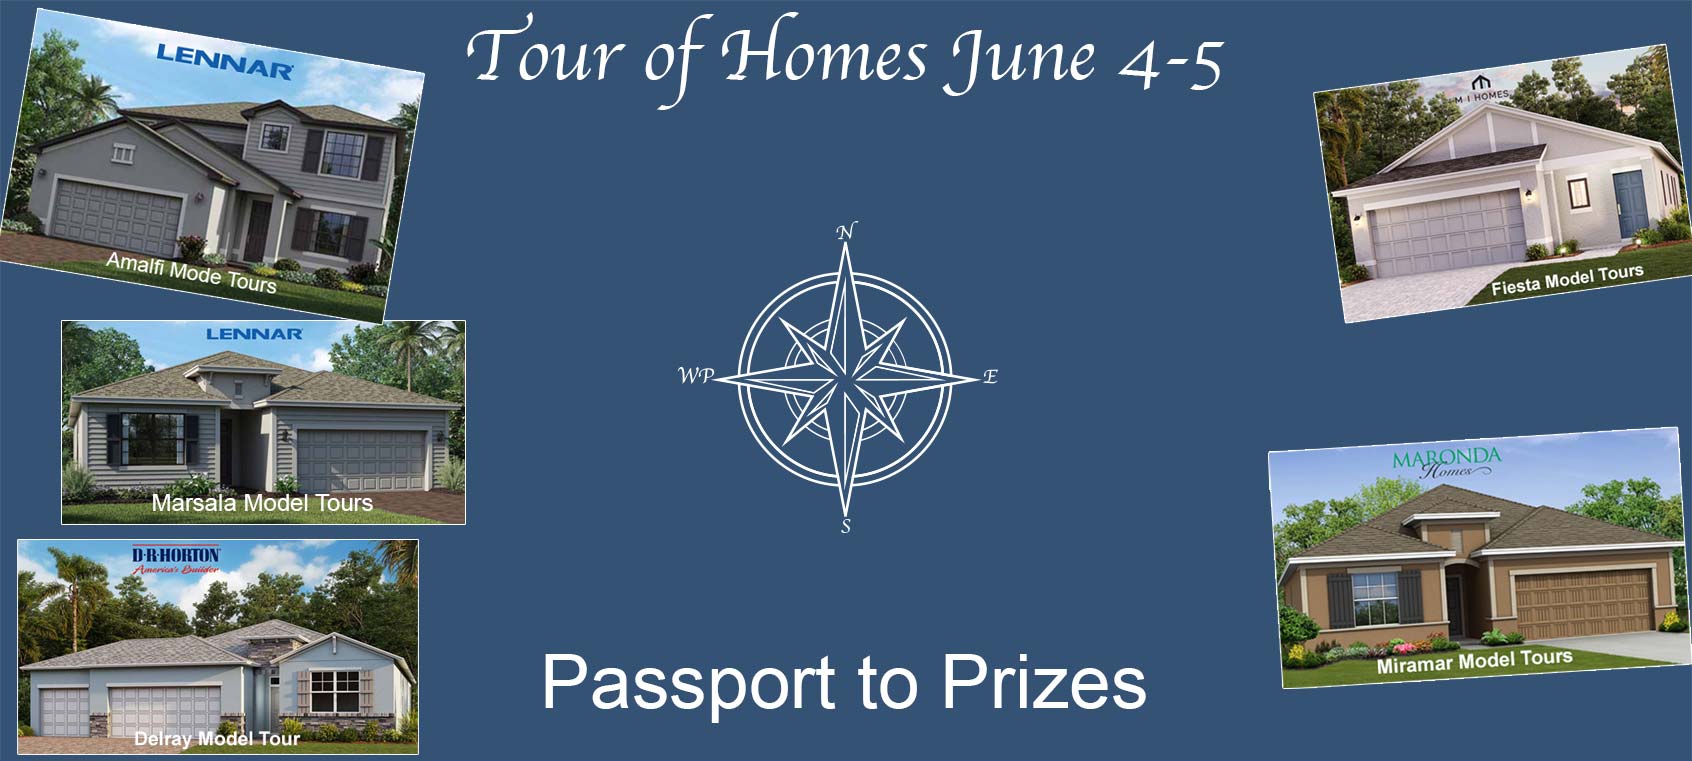 Tour 8 Models and Win Prizes at West Port June 4-5